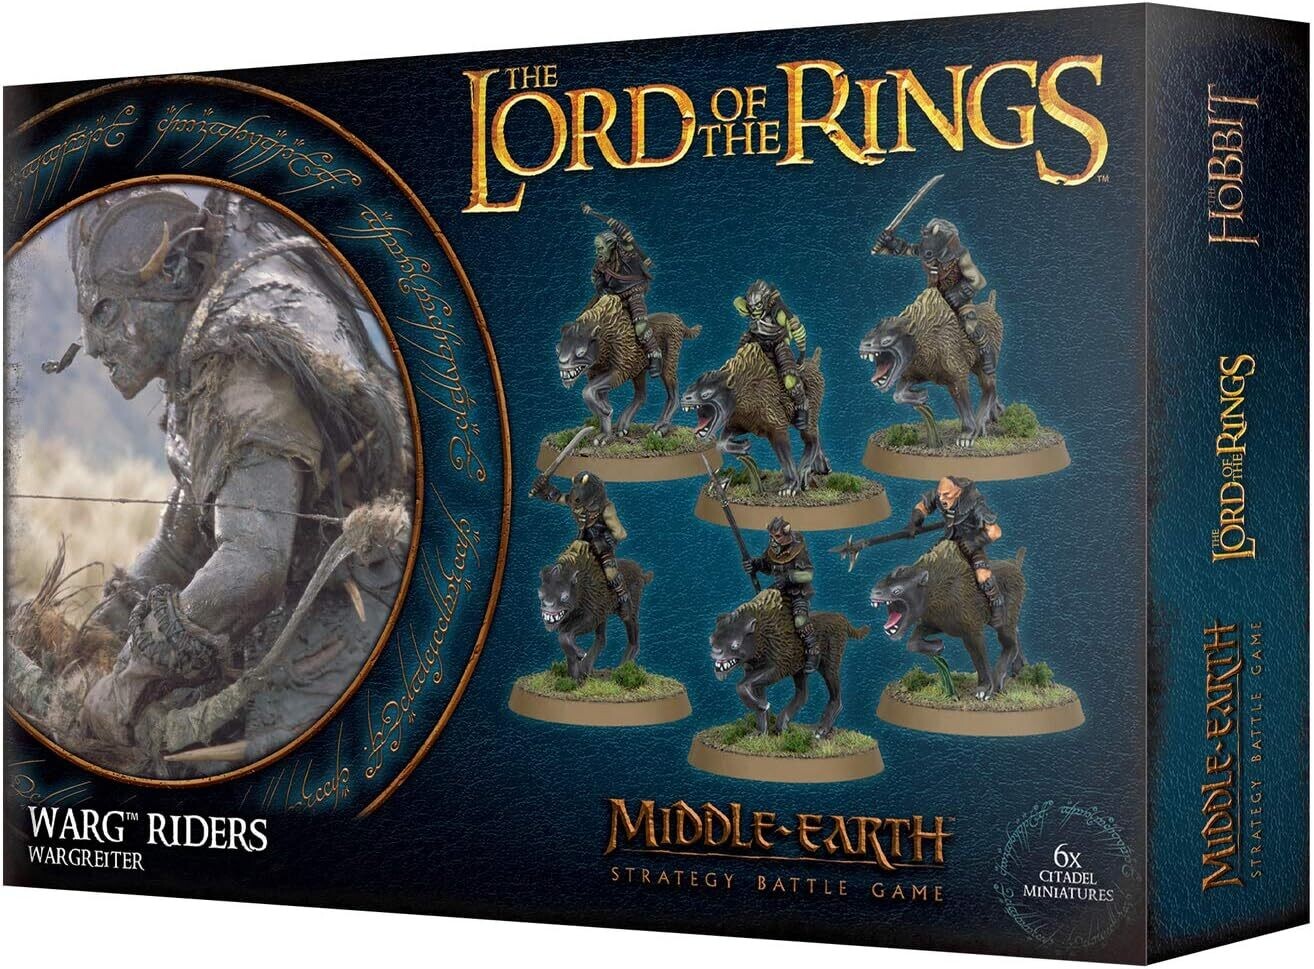 Middle-Earth SBG: The Lord of the Rings - Warg Riders